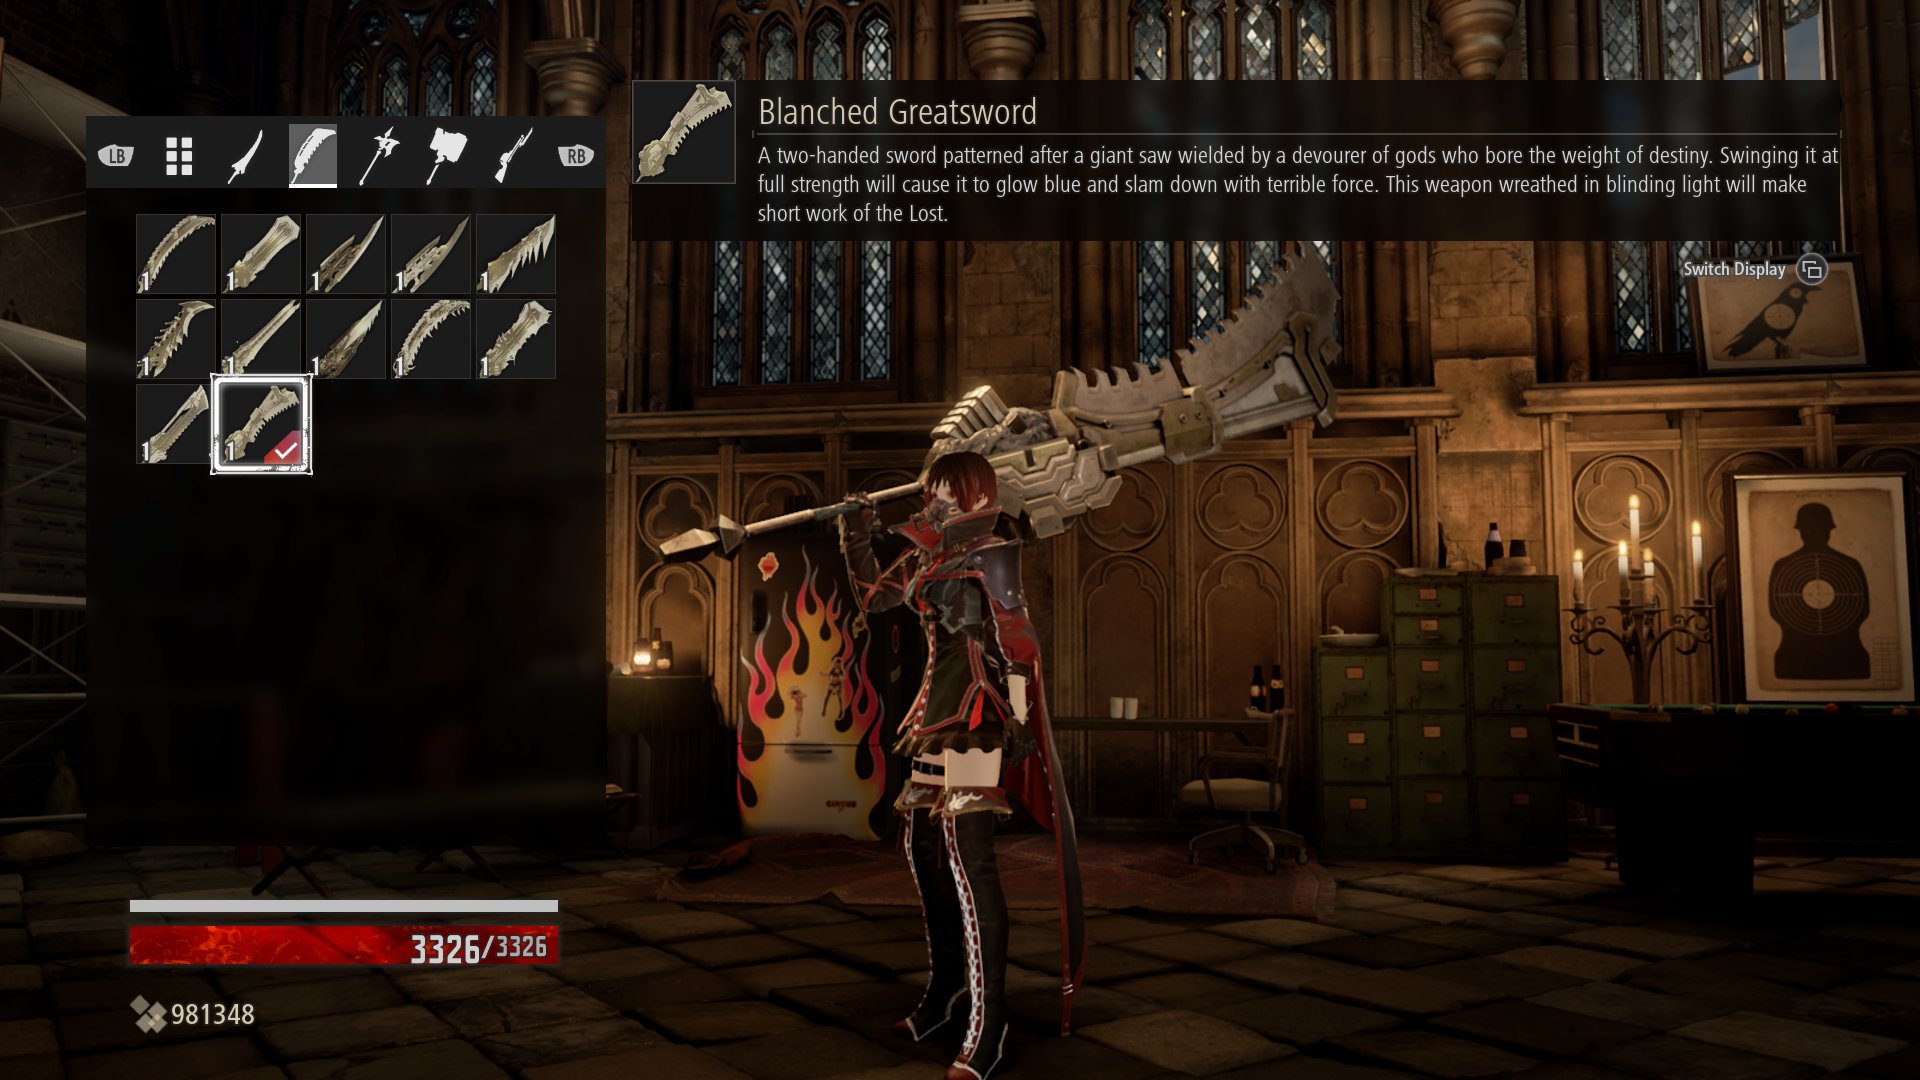 Hands-On Preview] 'Code Vein' Builds on the Soulsborne Template With  Blood-Spattered Anime Style - Bloody Disgusting